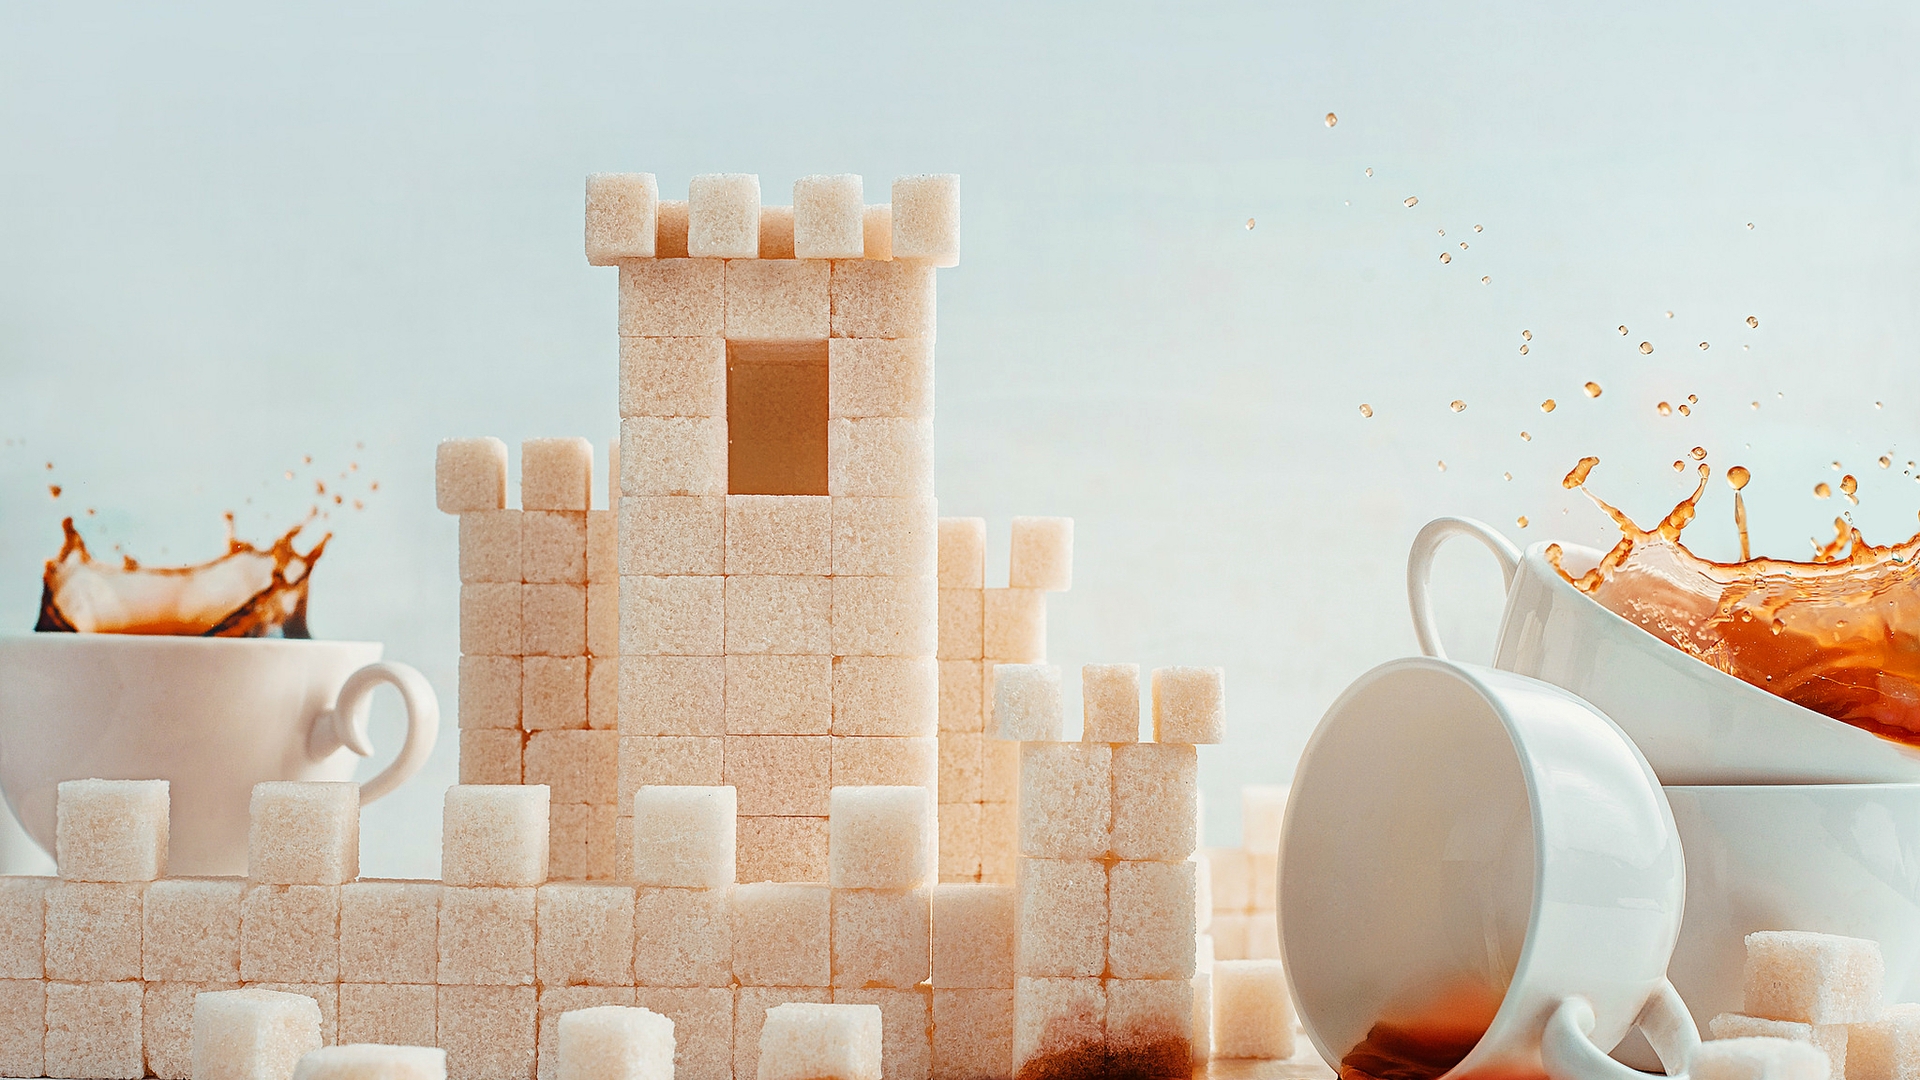 Sugar Cubes and Coffee Cups for 1920 x 1080 HDTV 1080p resolution